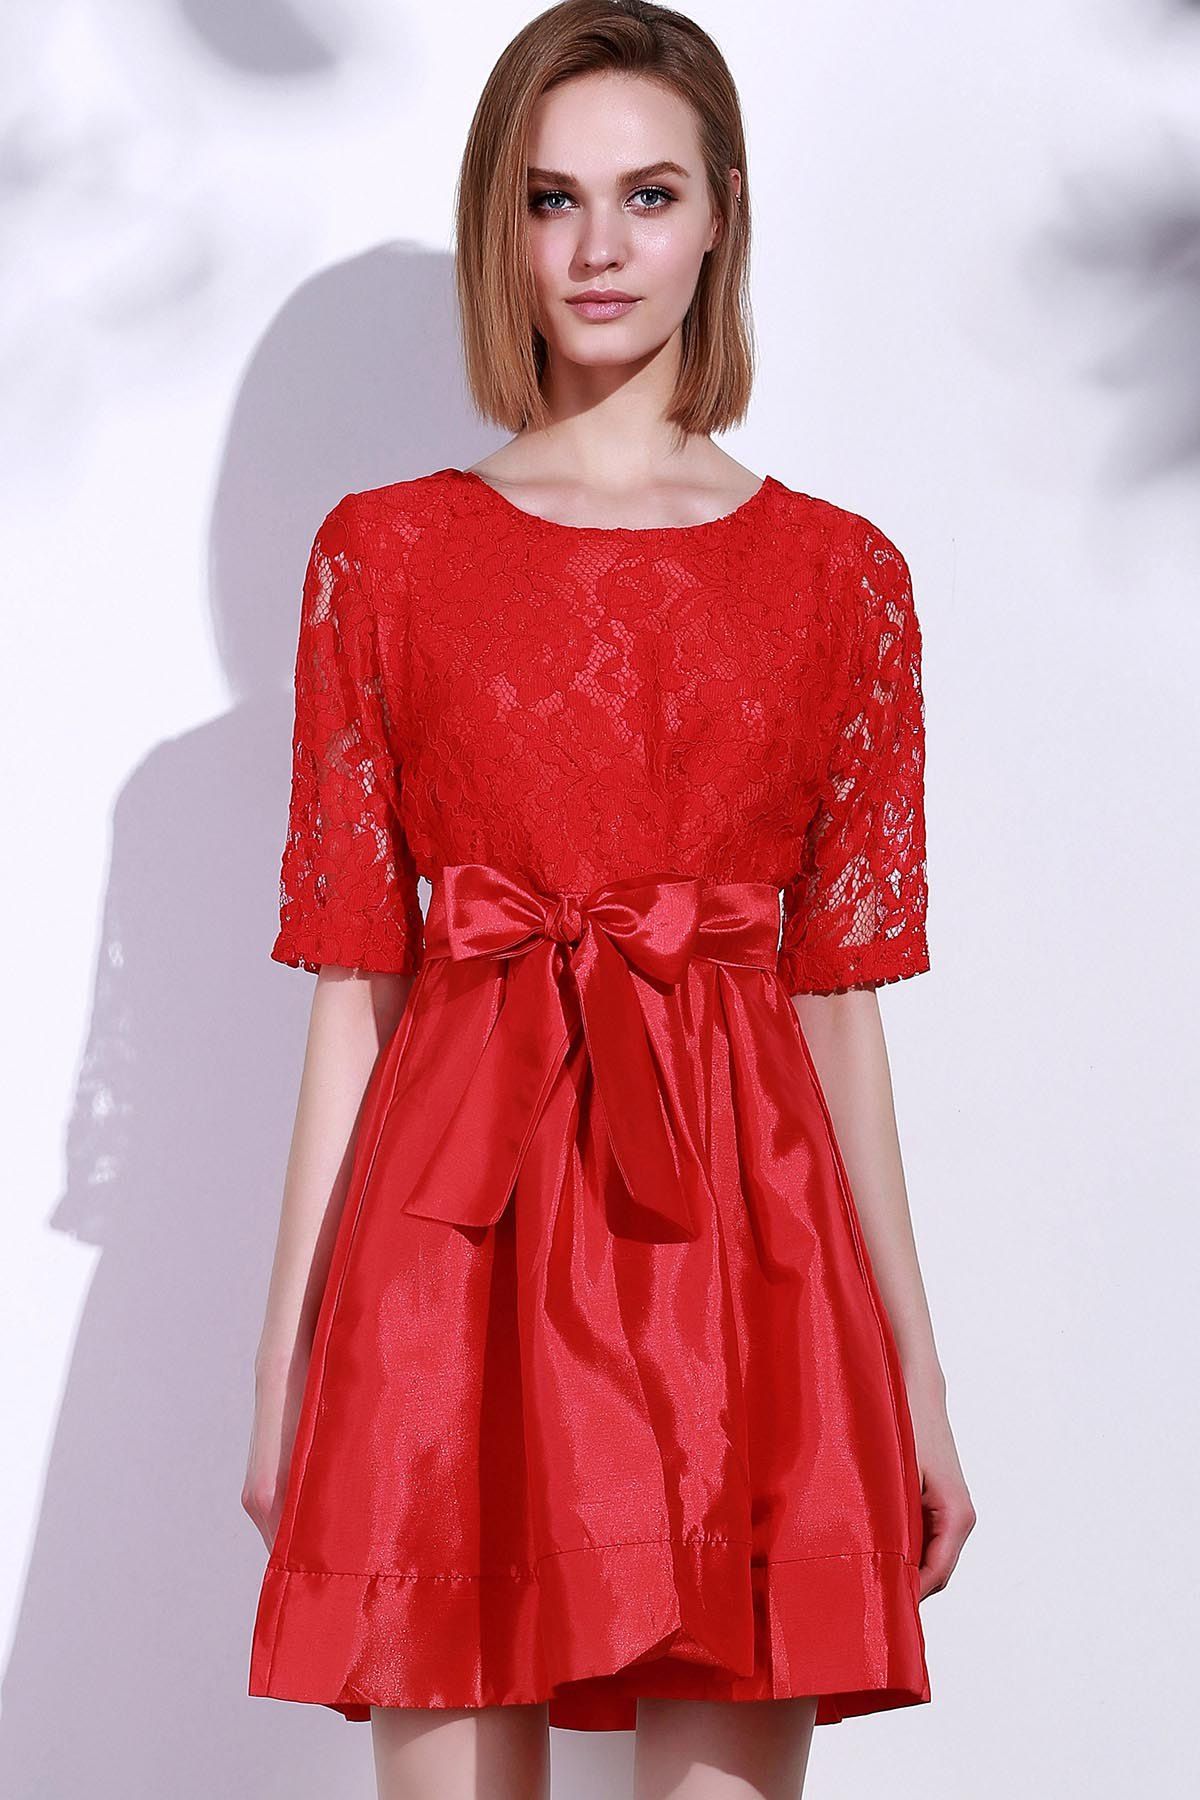 Elegant Round Neck Half Sleeve Bowknot Embellished Hollow Out Women's Dress 